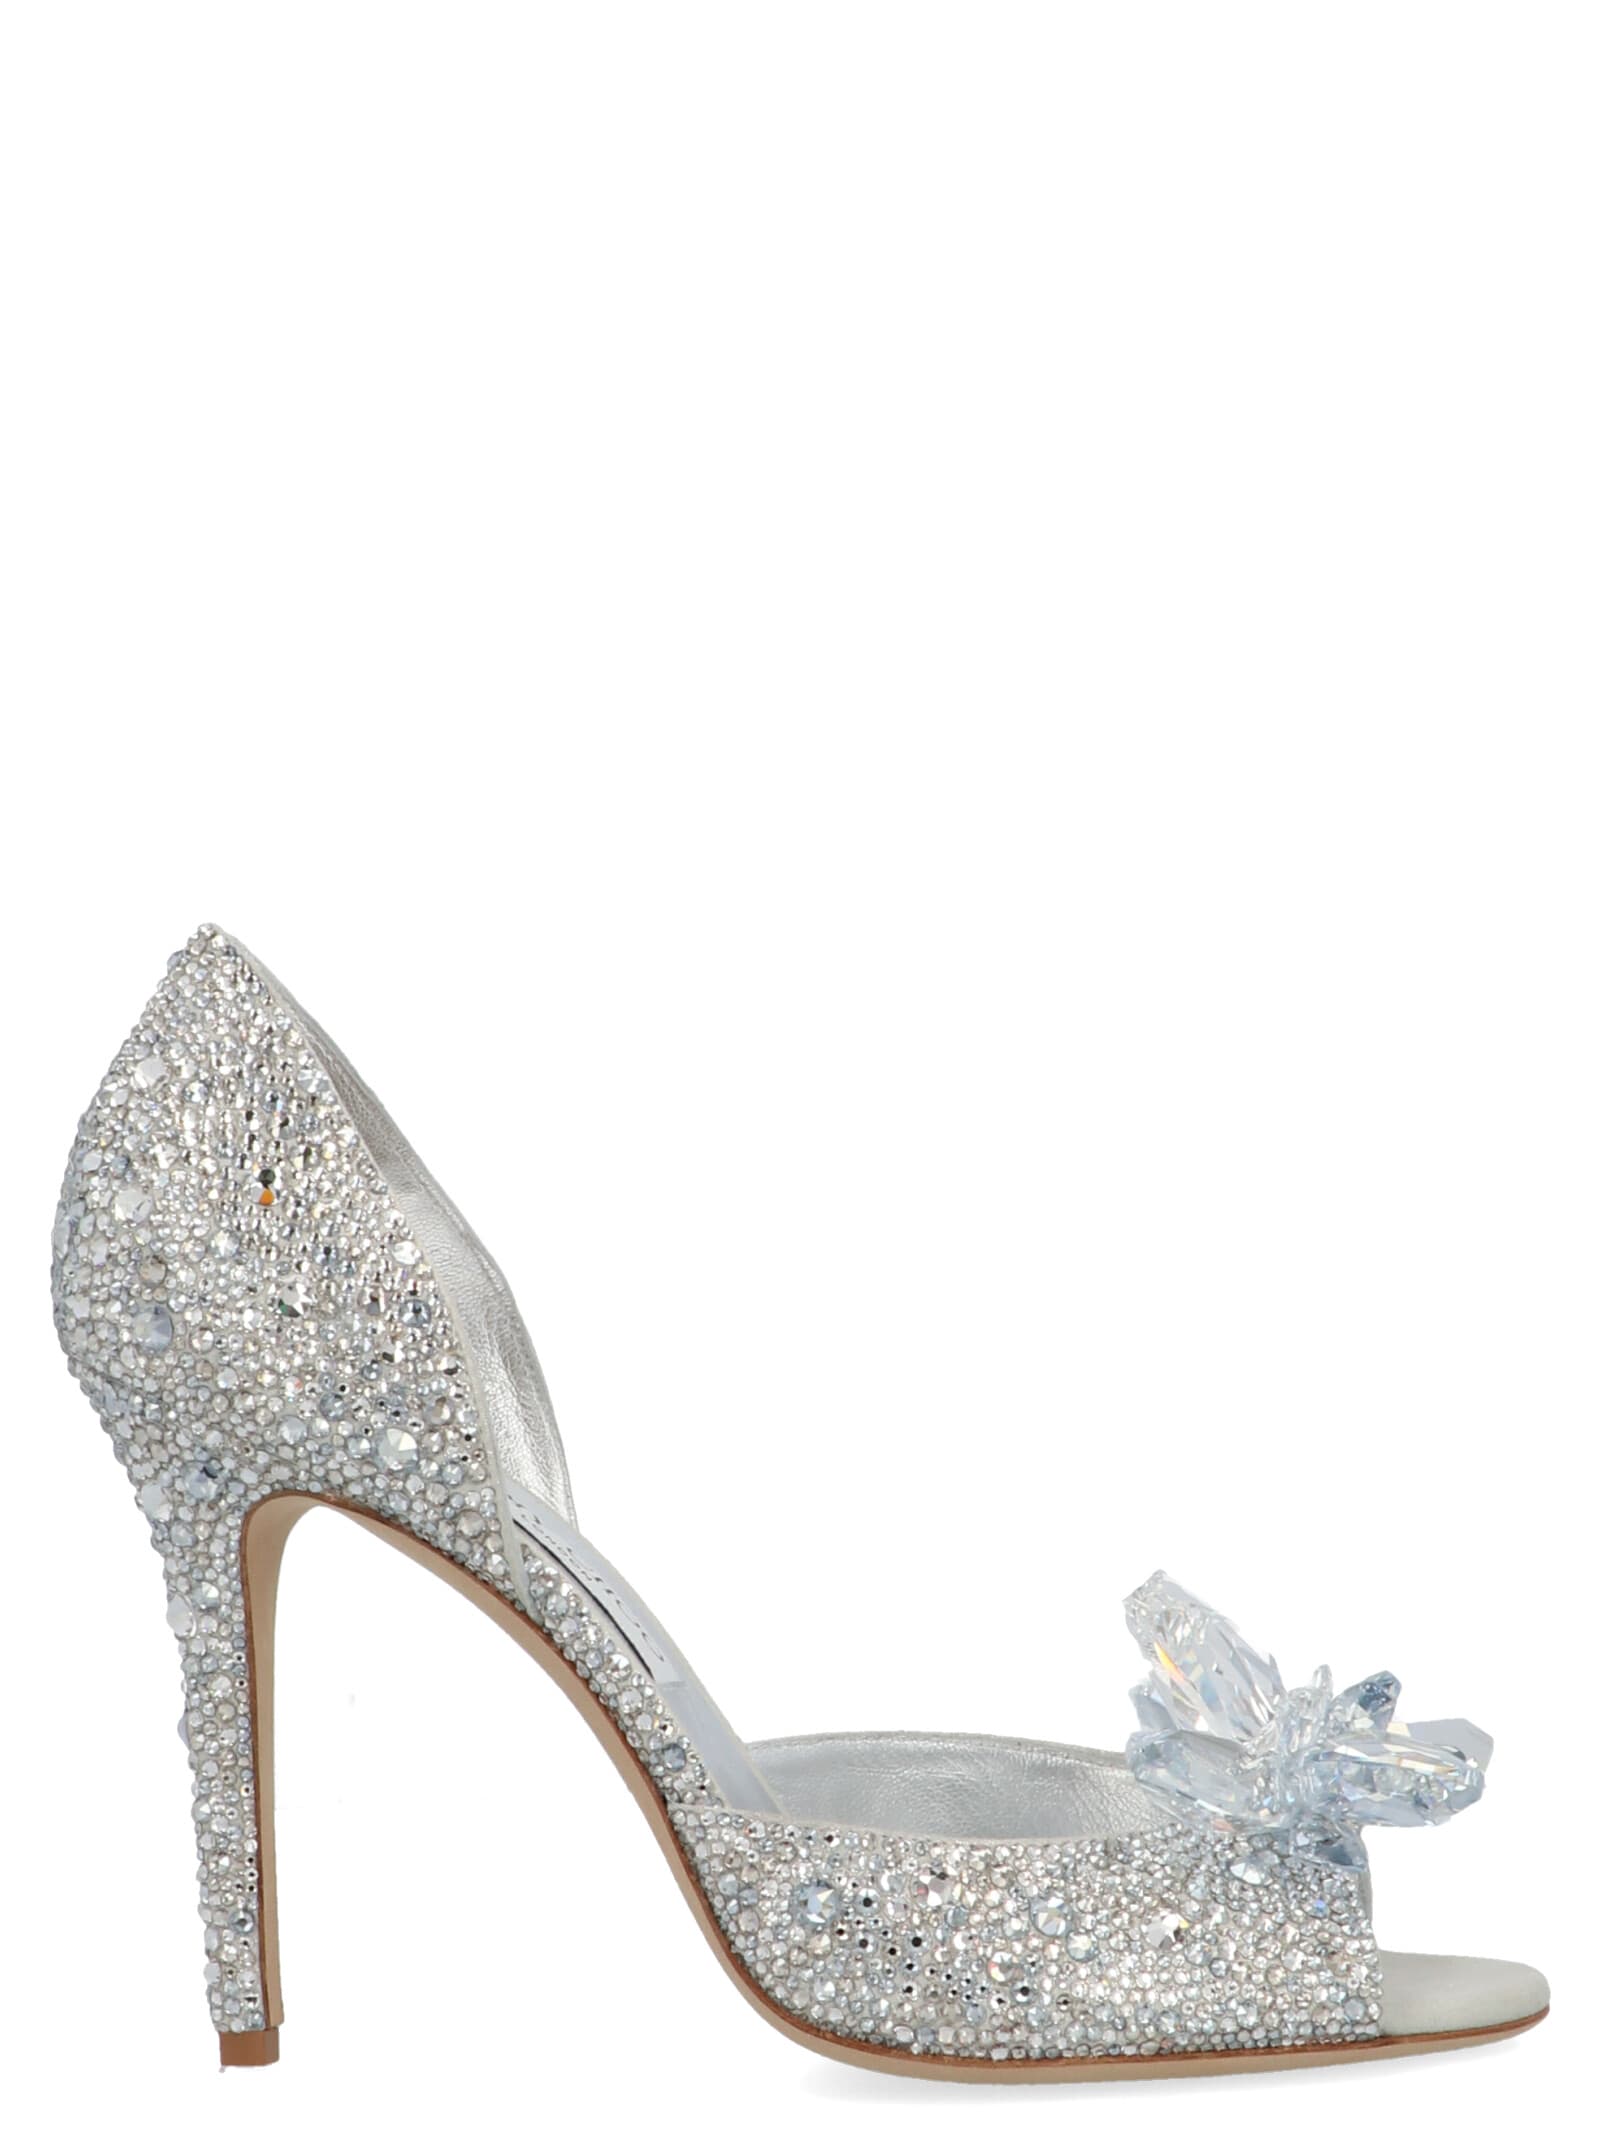 Buy Jimmy Choo cinderella Shoes online, shop Jimmy Choo shoes with free shipping